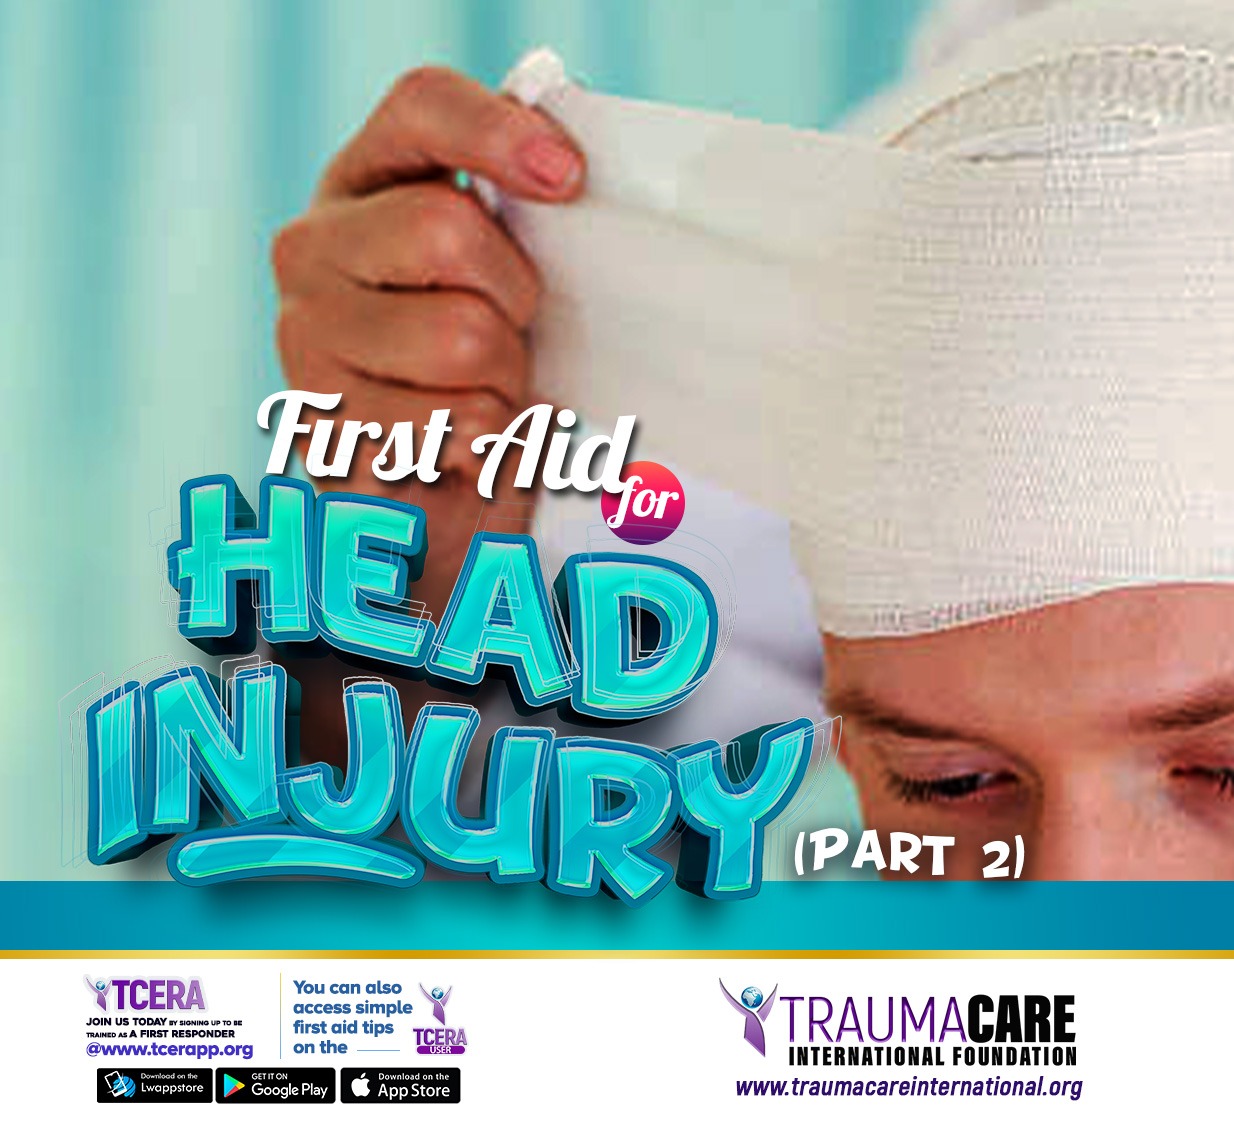  FIRST AID FOR HEAD INJURY (UNCONSCIOUS CASUALTY) PART 2 